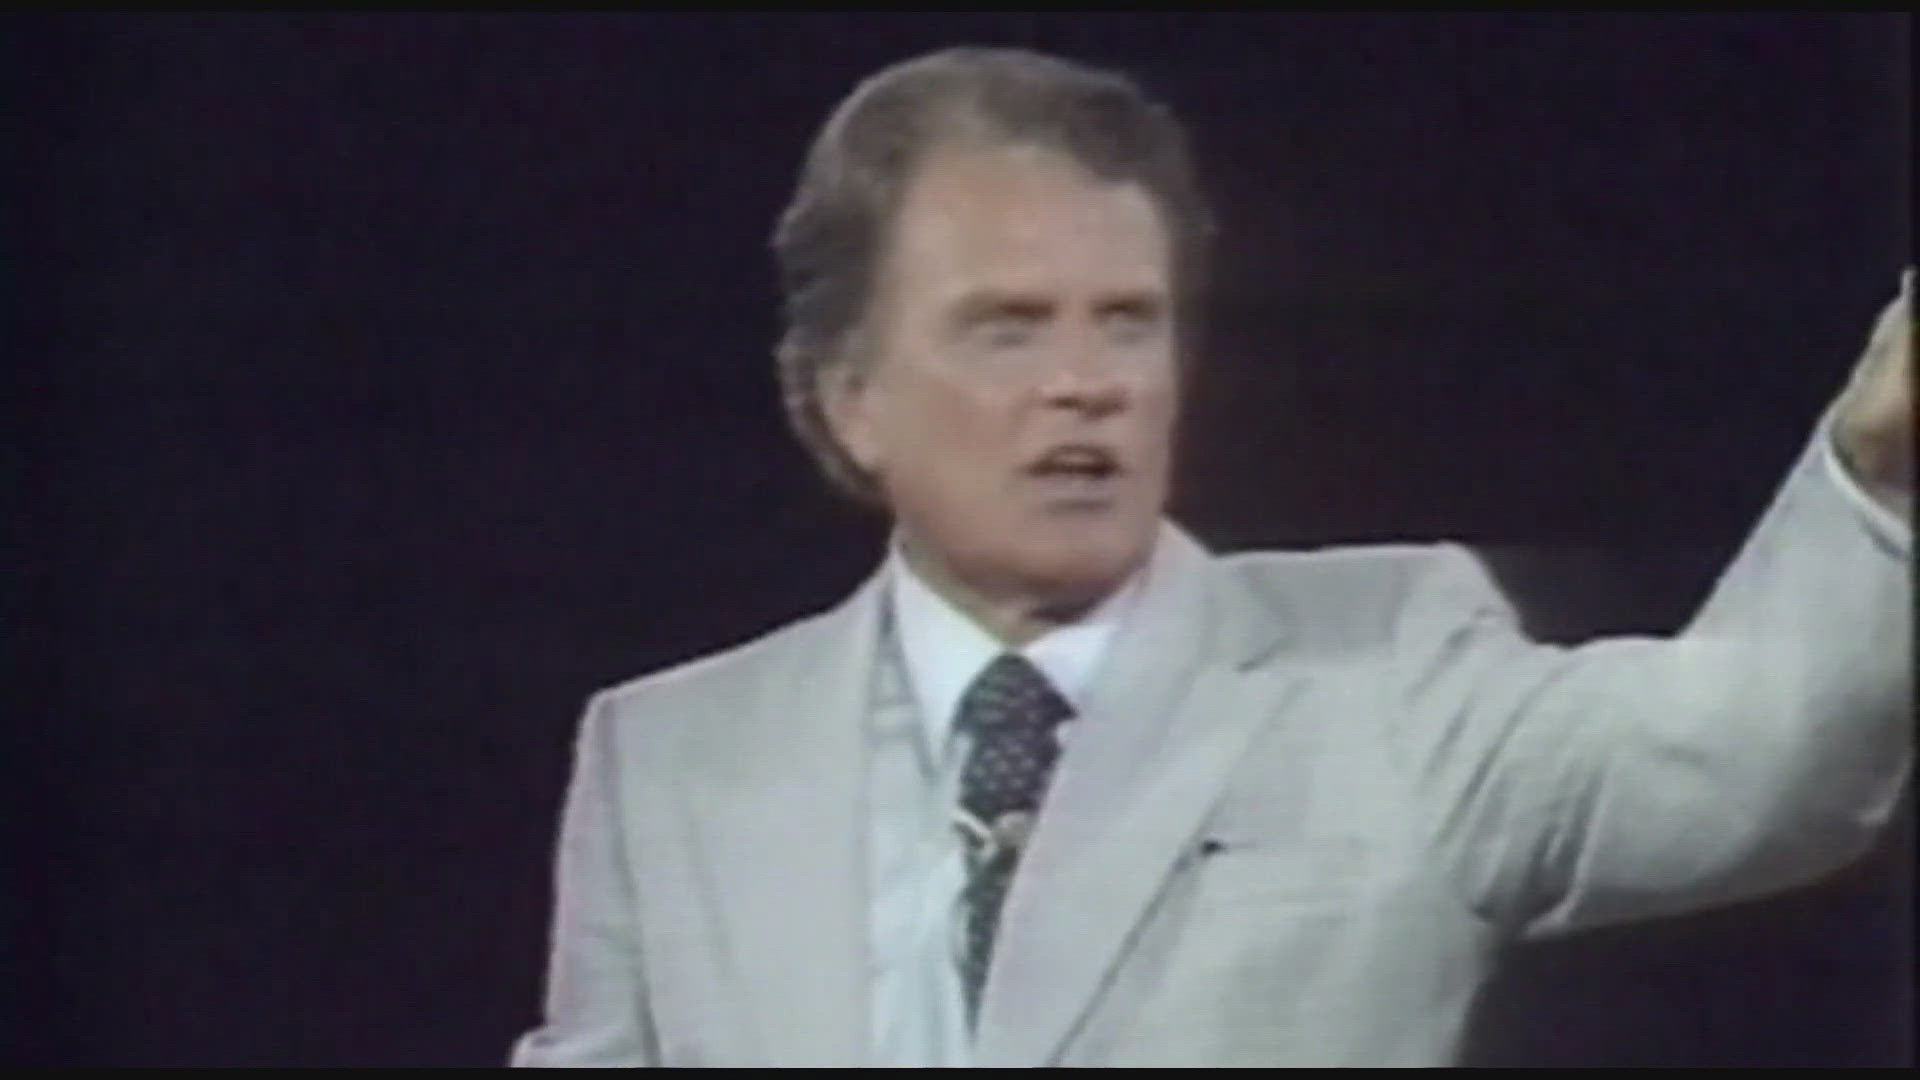 On February 21, 2018, many people woke up to the news that Evangelist Billy Graham had passed away.